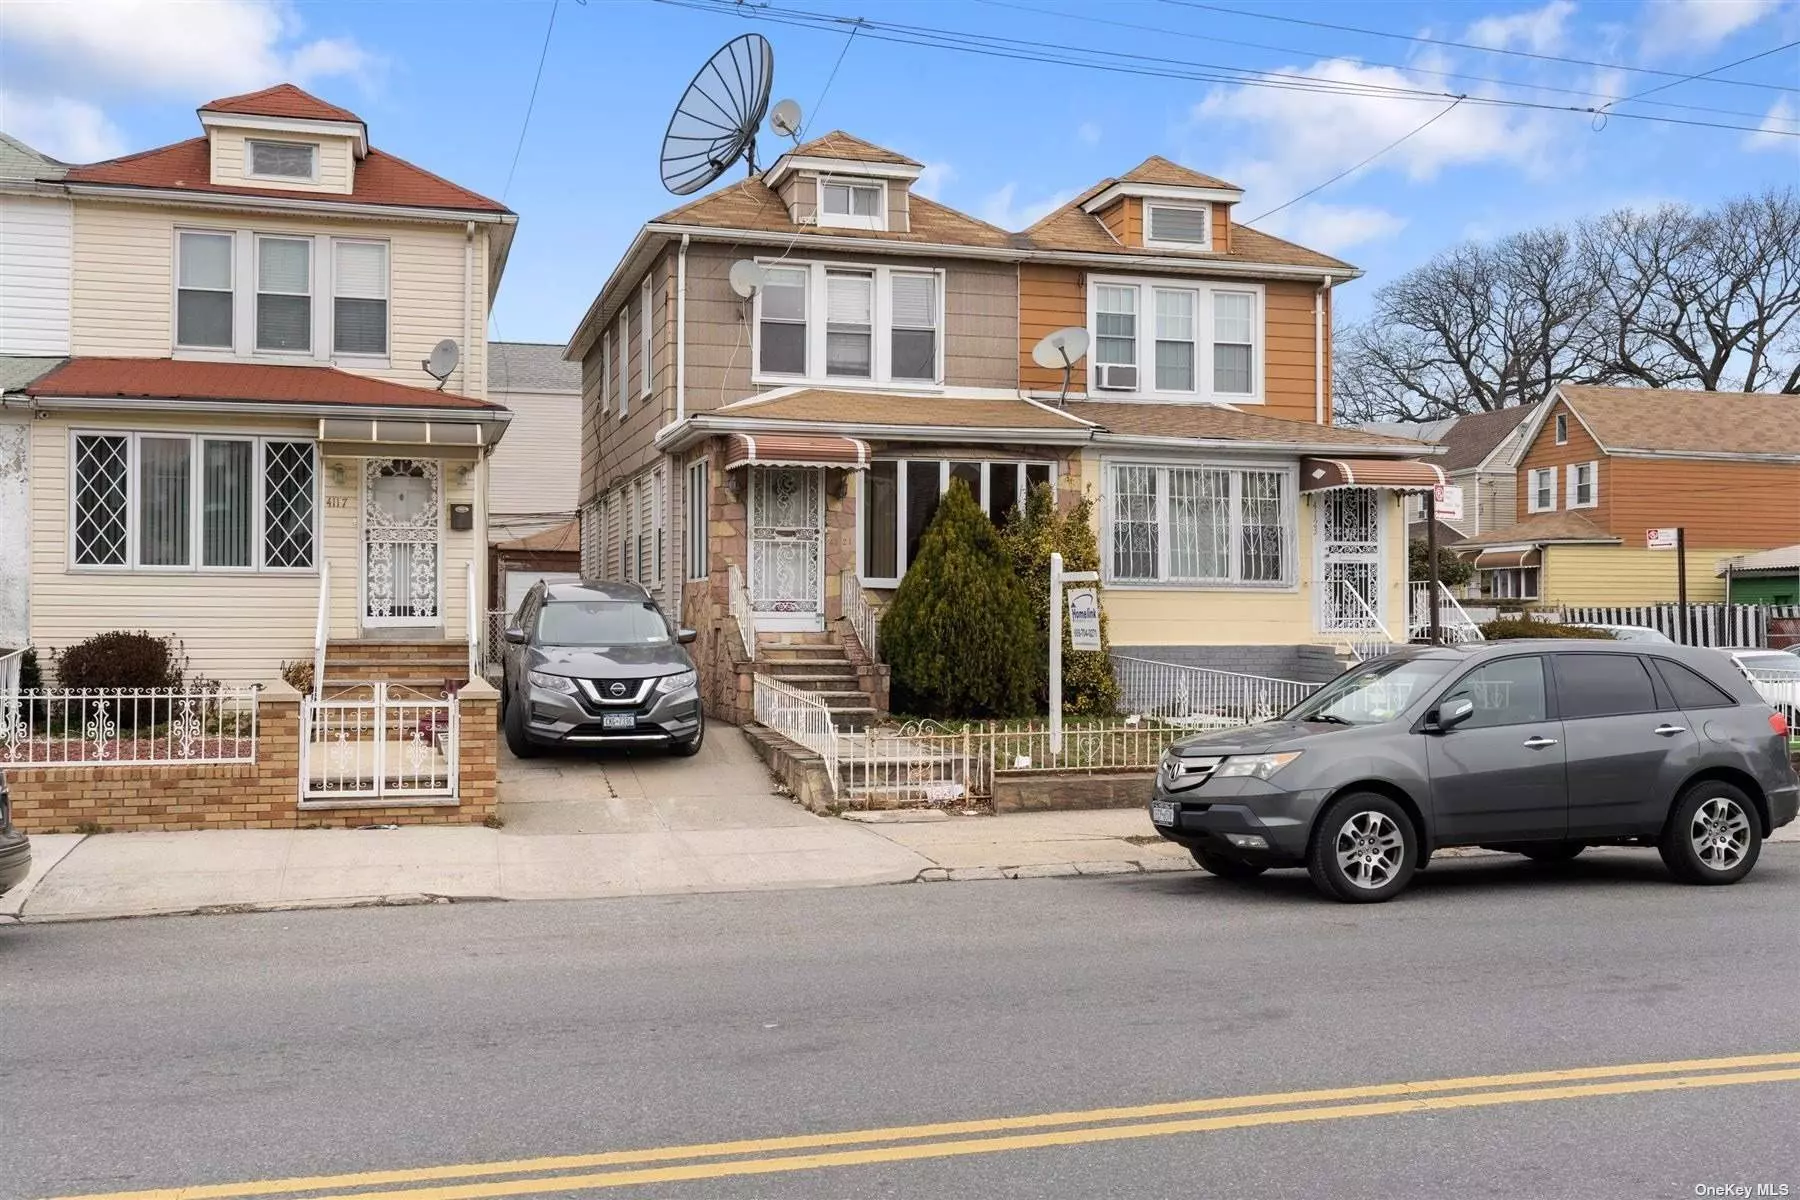 New to market One Family Semi-detached REO home in the heart of East Flatbush finished basement, and 2 car detached garage. Home needs interior renovations, great bones to work with! This property is bank owned, and will accept mortgaged offers.